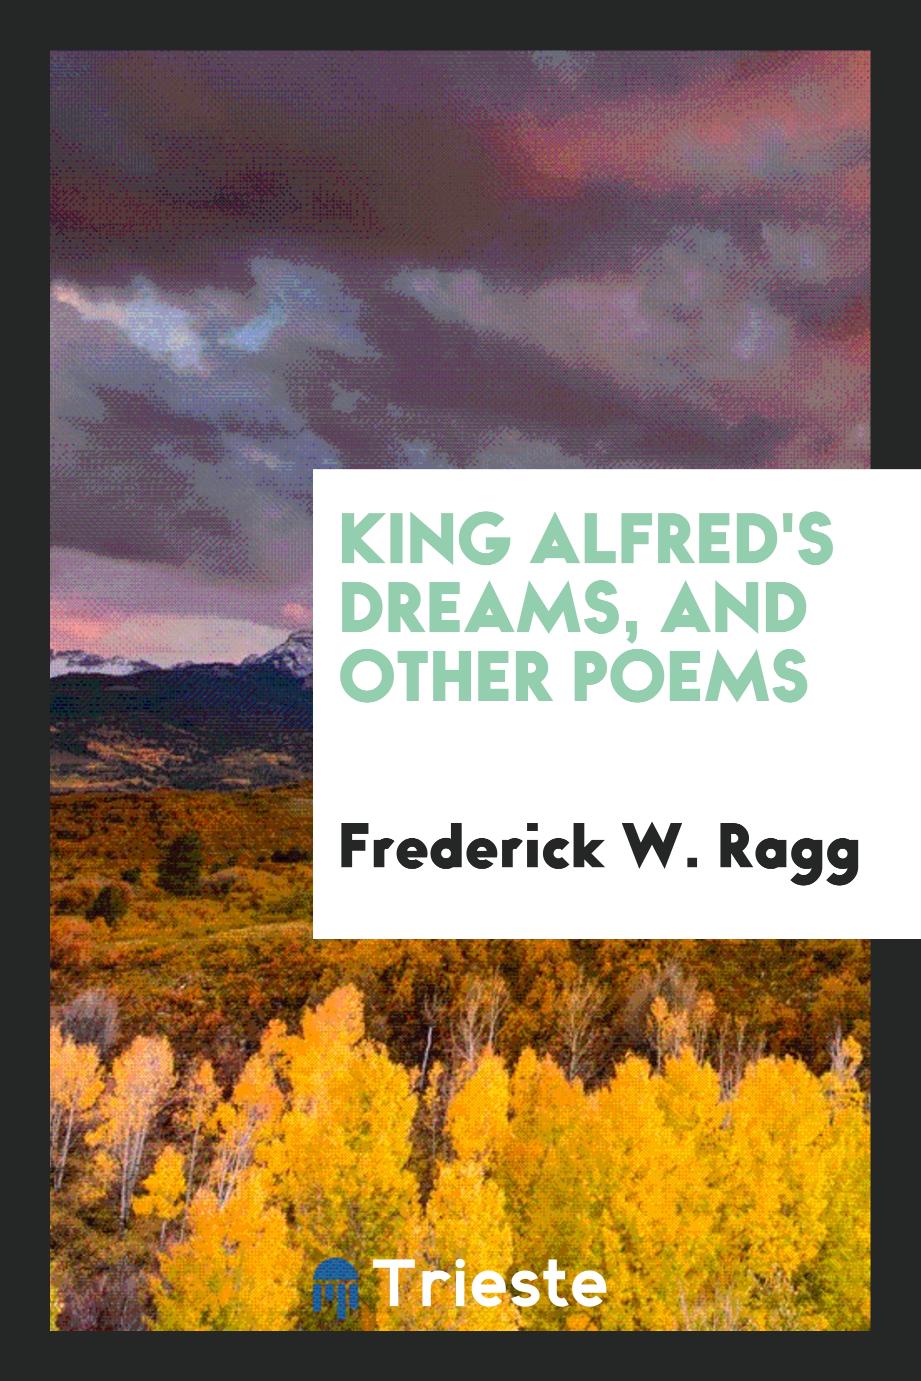 King Alfred's Dreams, and Other Poems